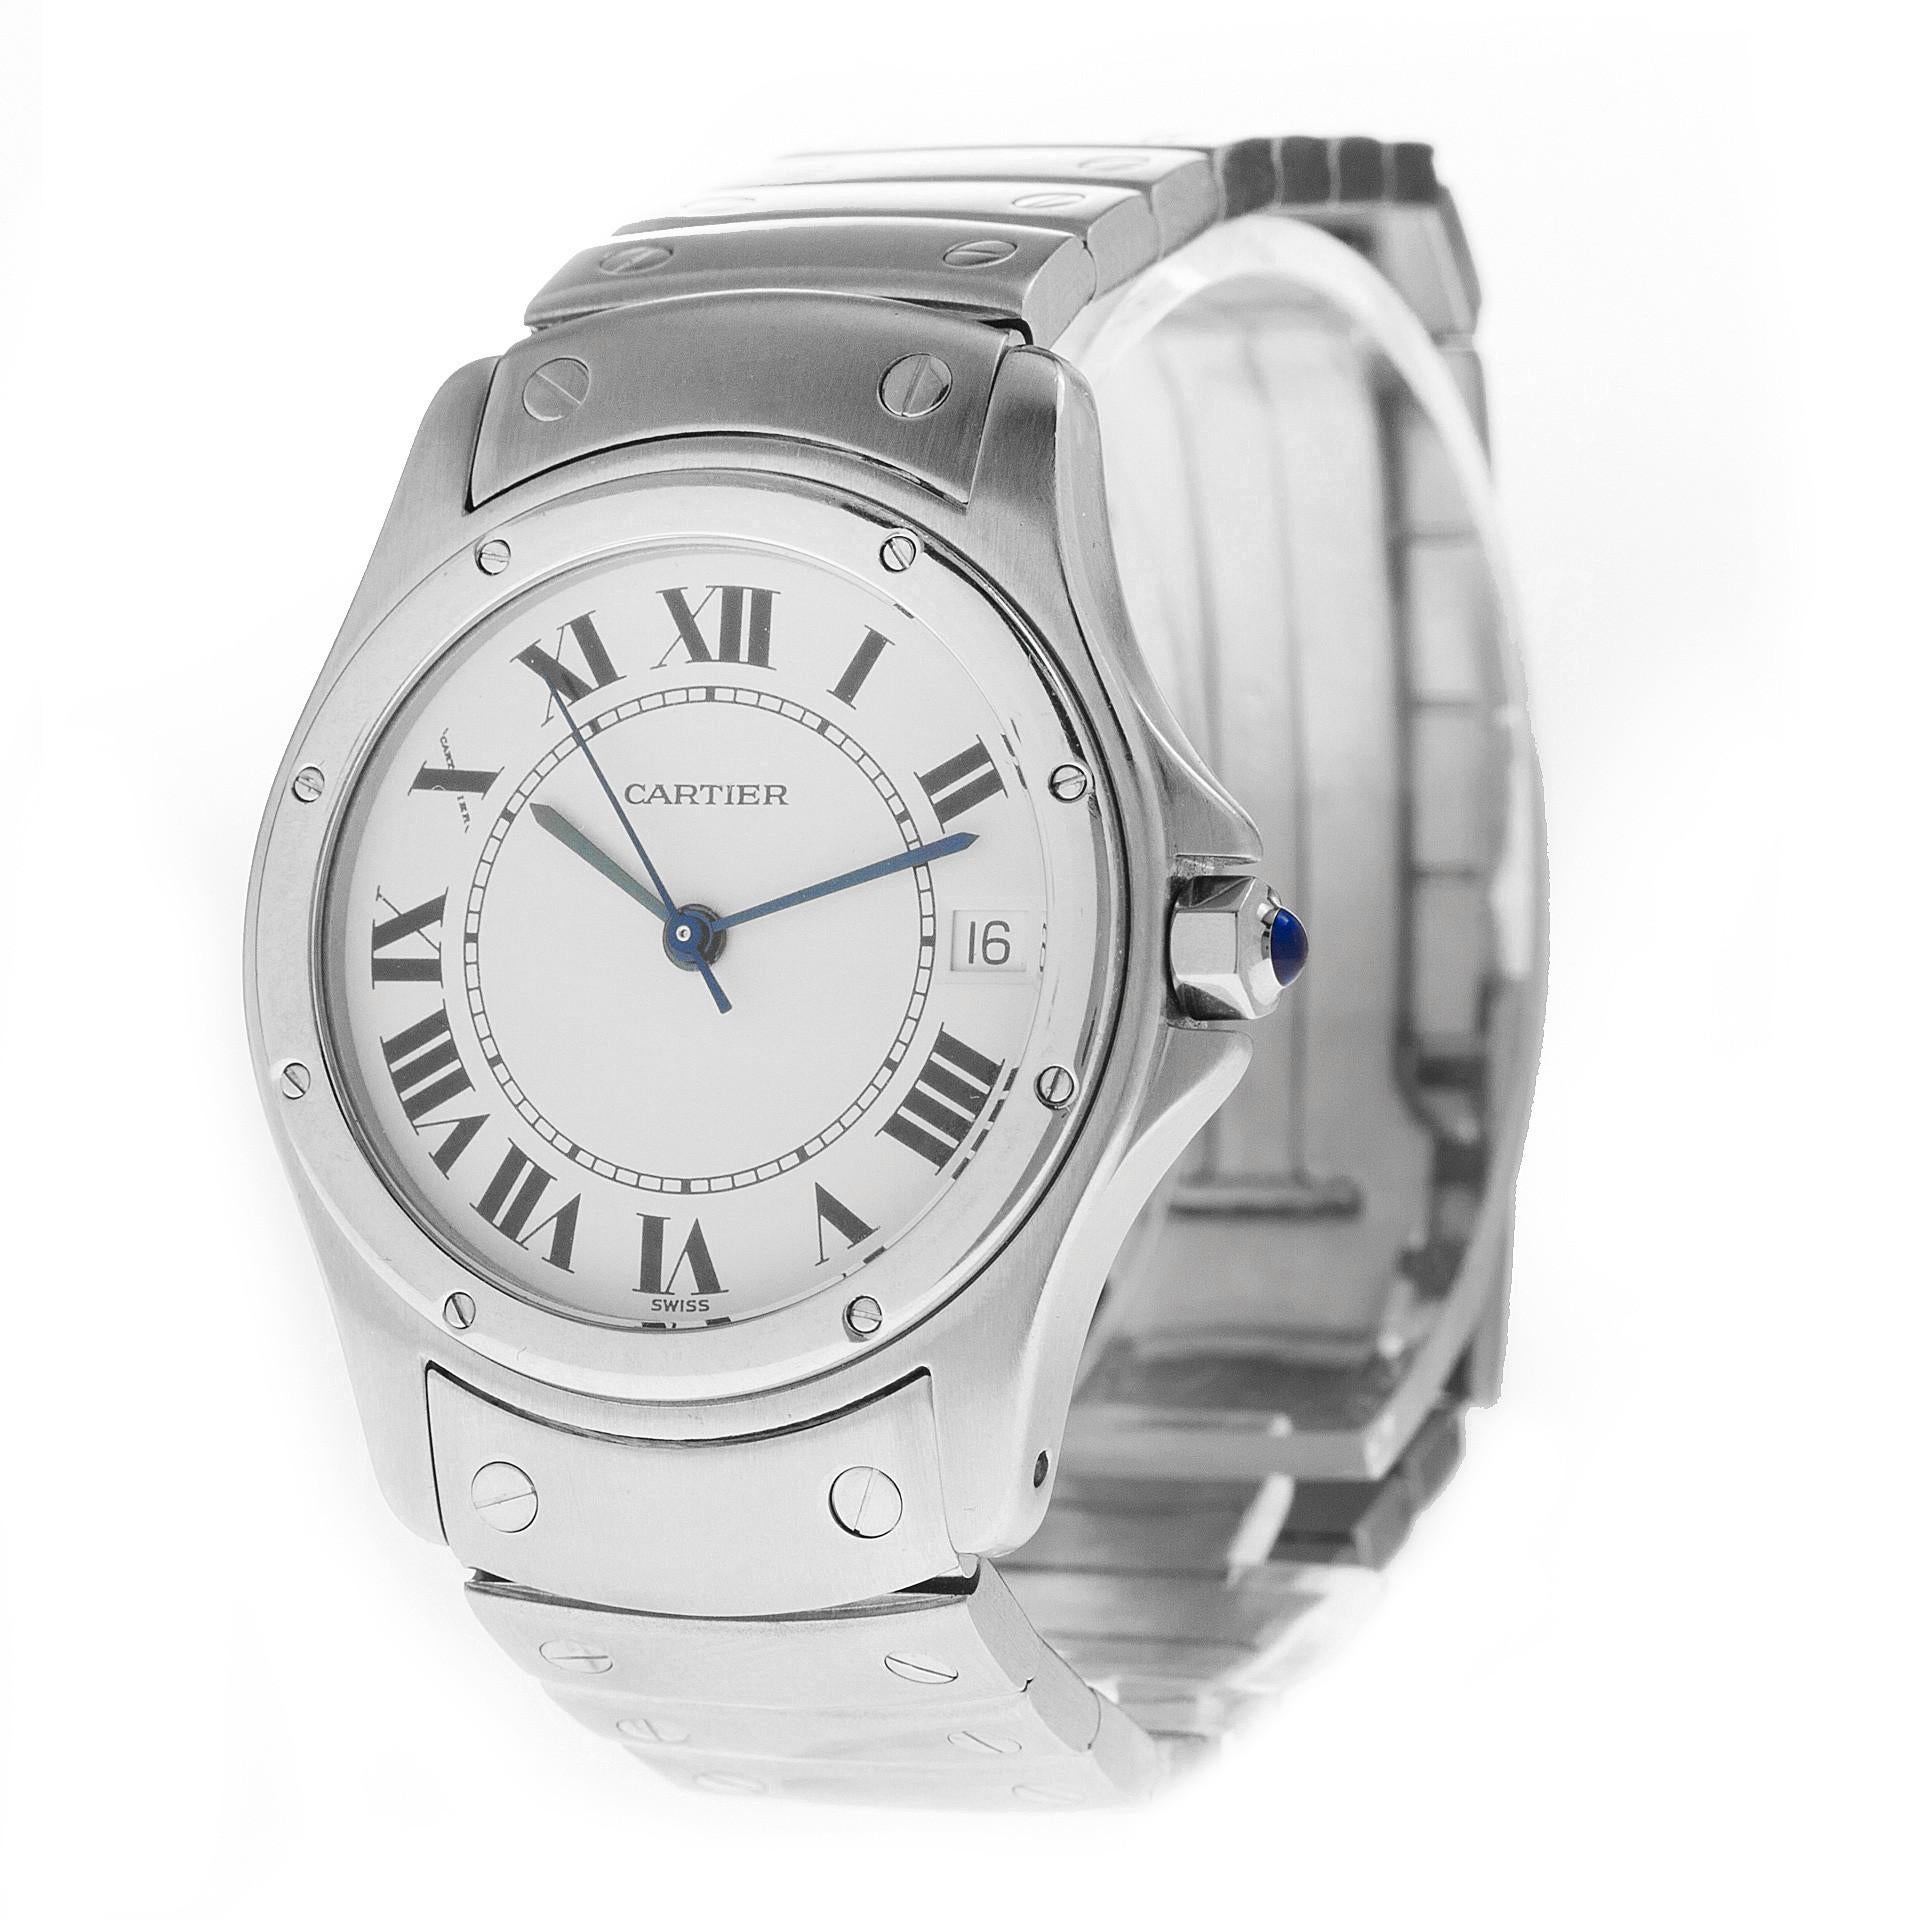 Certified Authentic, Cartier Santos de Cartier 3528, White Dial In Good Condition For Sale In Miami, FL